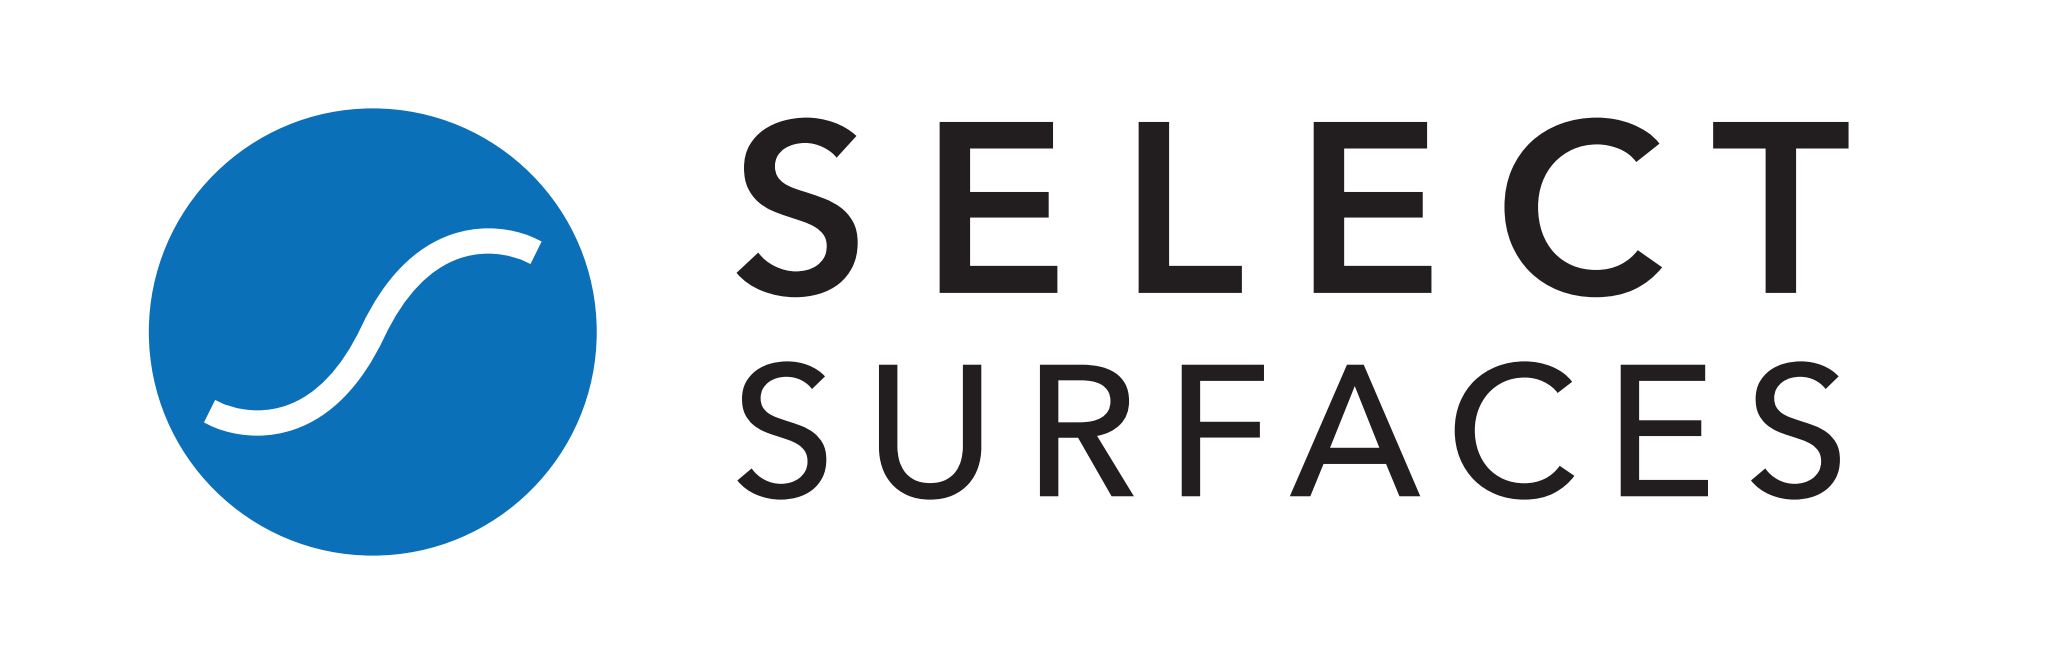 Select Surfaces